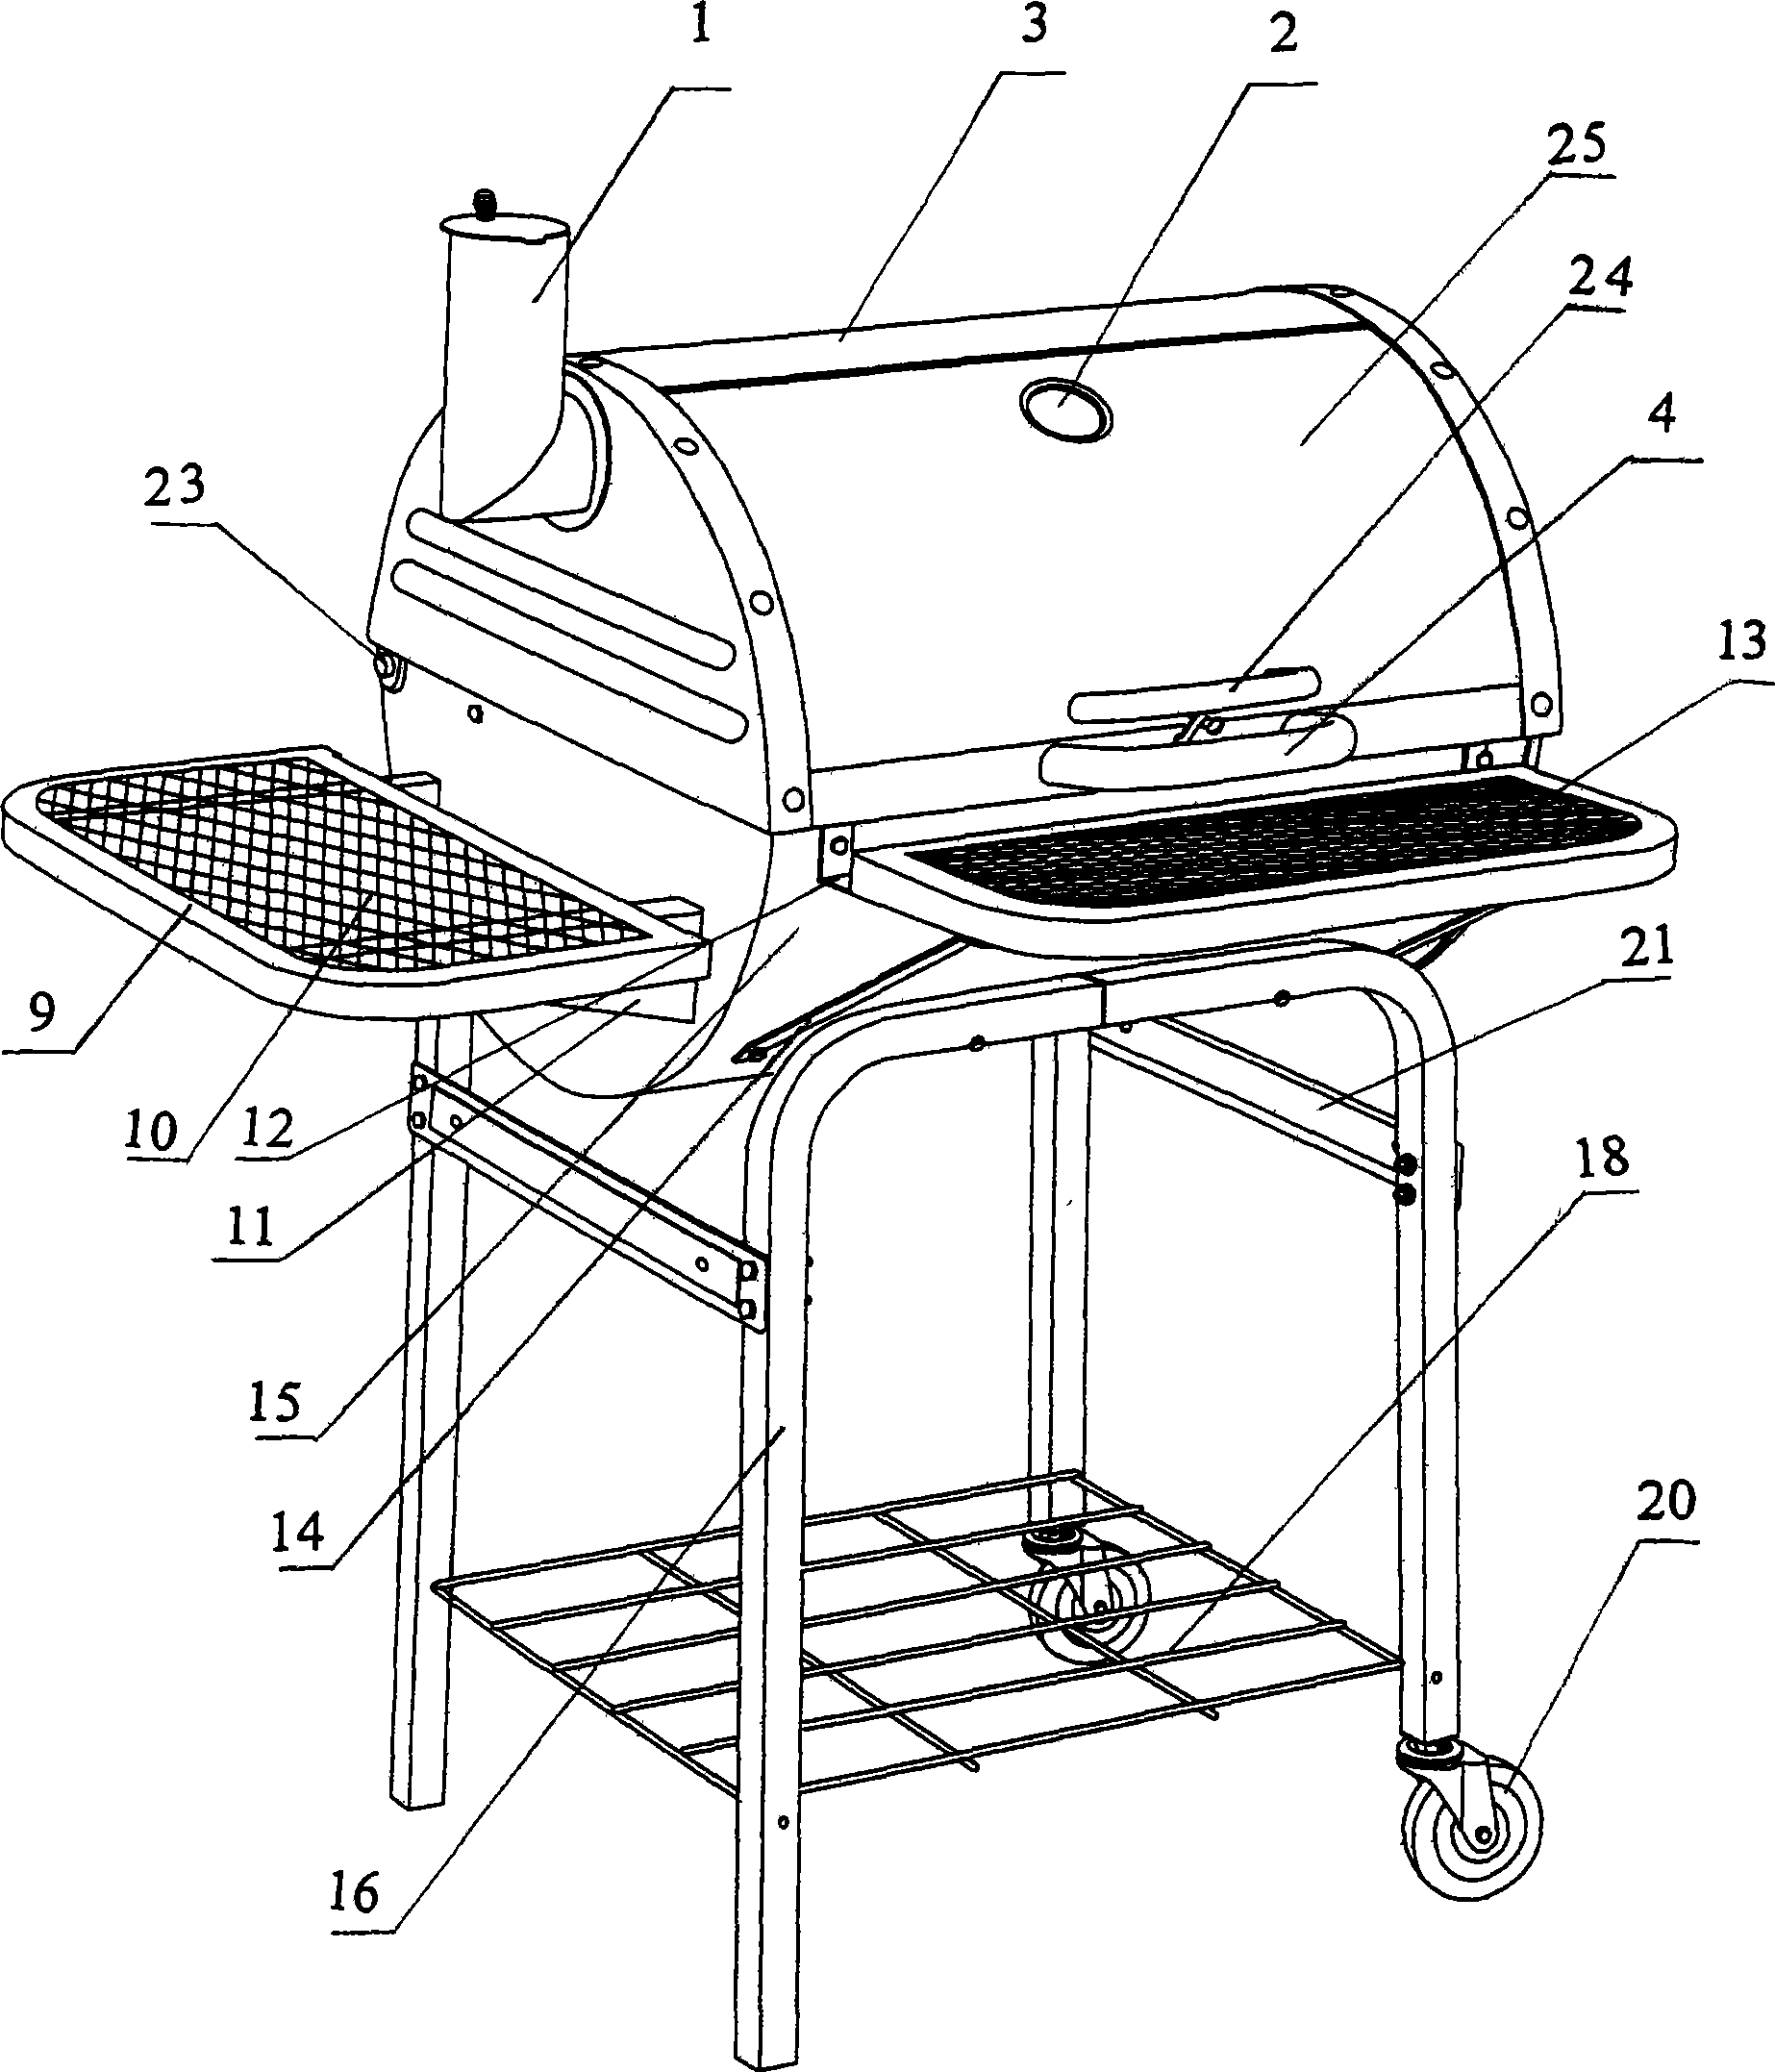 Barbecue furnace with cover